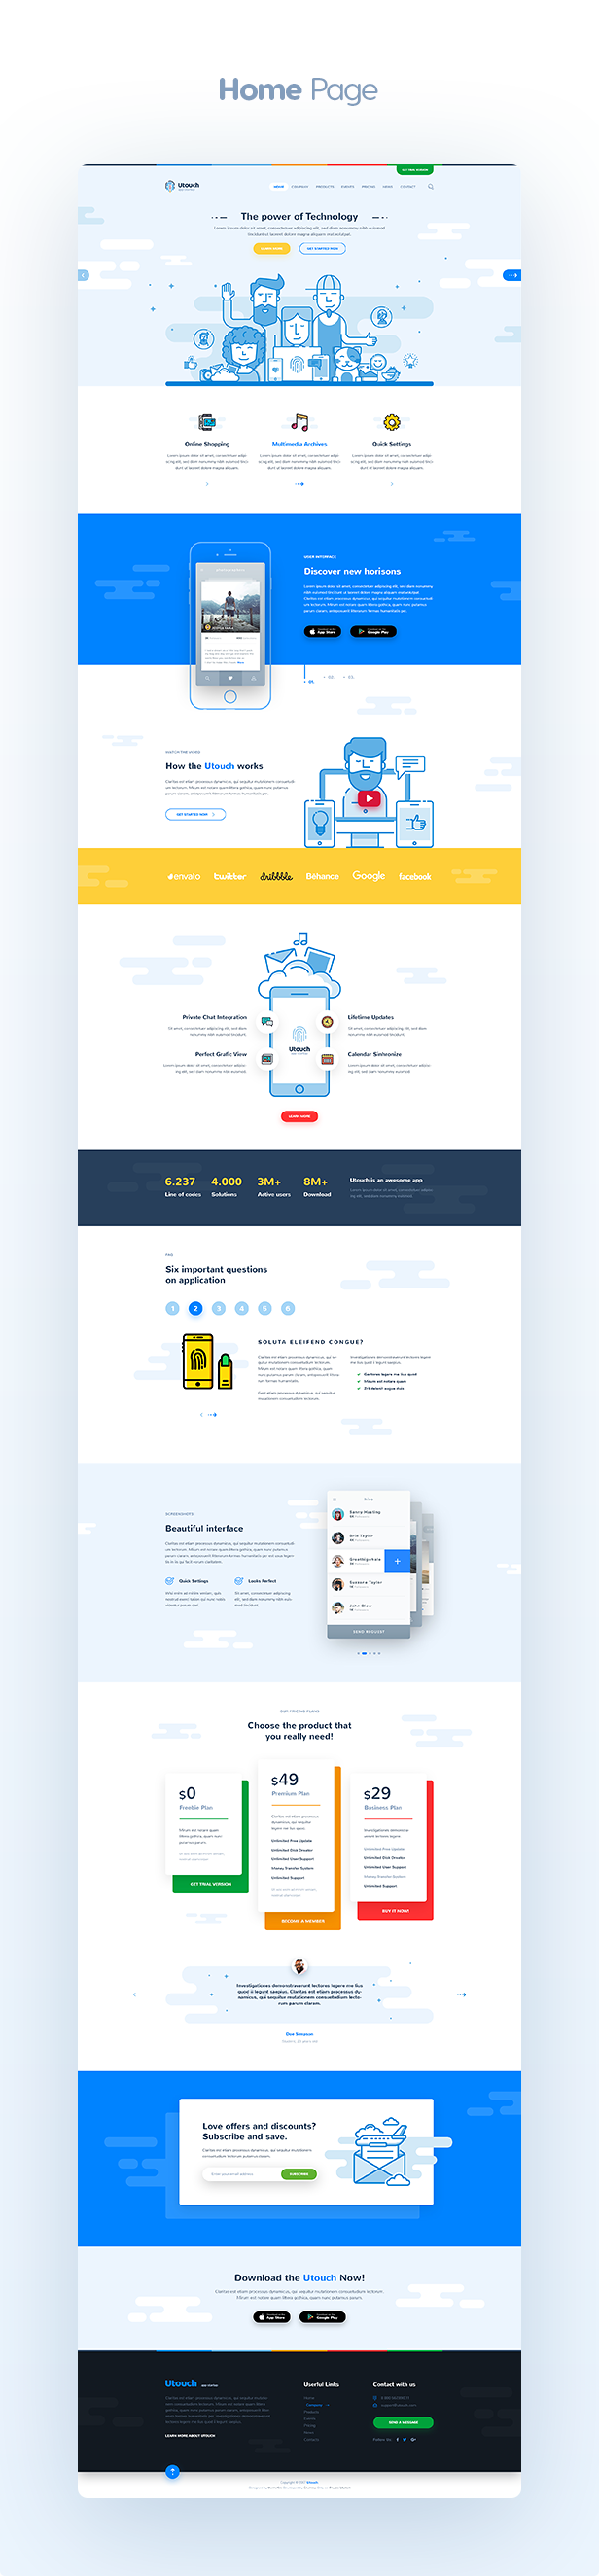 Download Utouch App Startup Website Psd Template By Themefire Themeforest PSD Mockup Templates